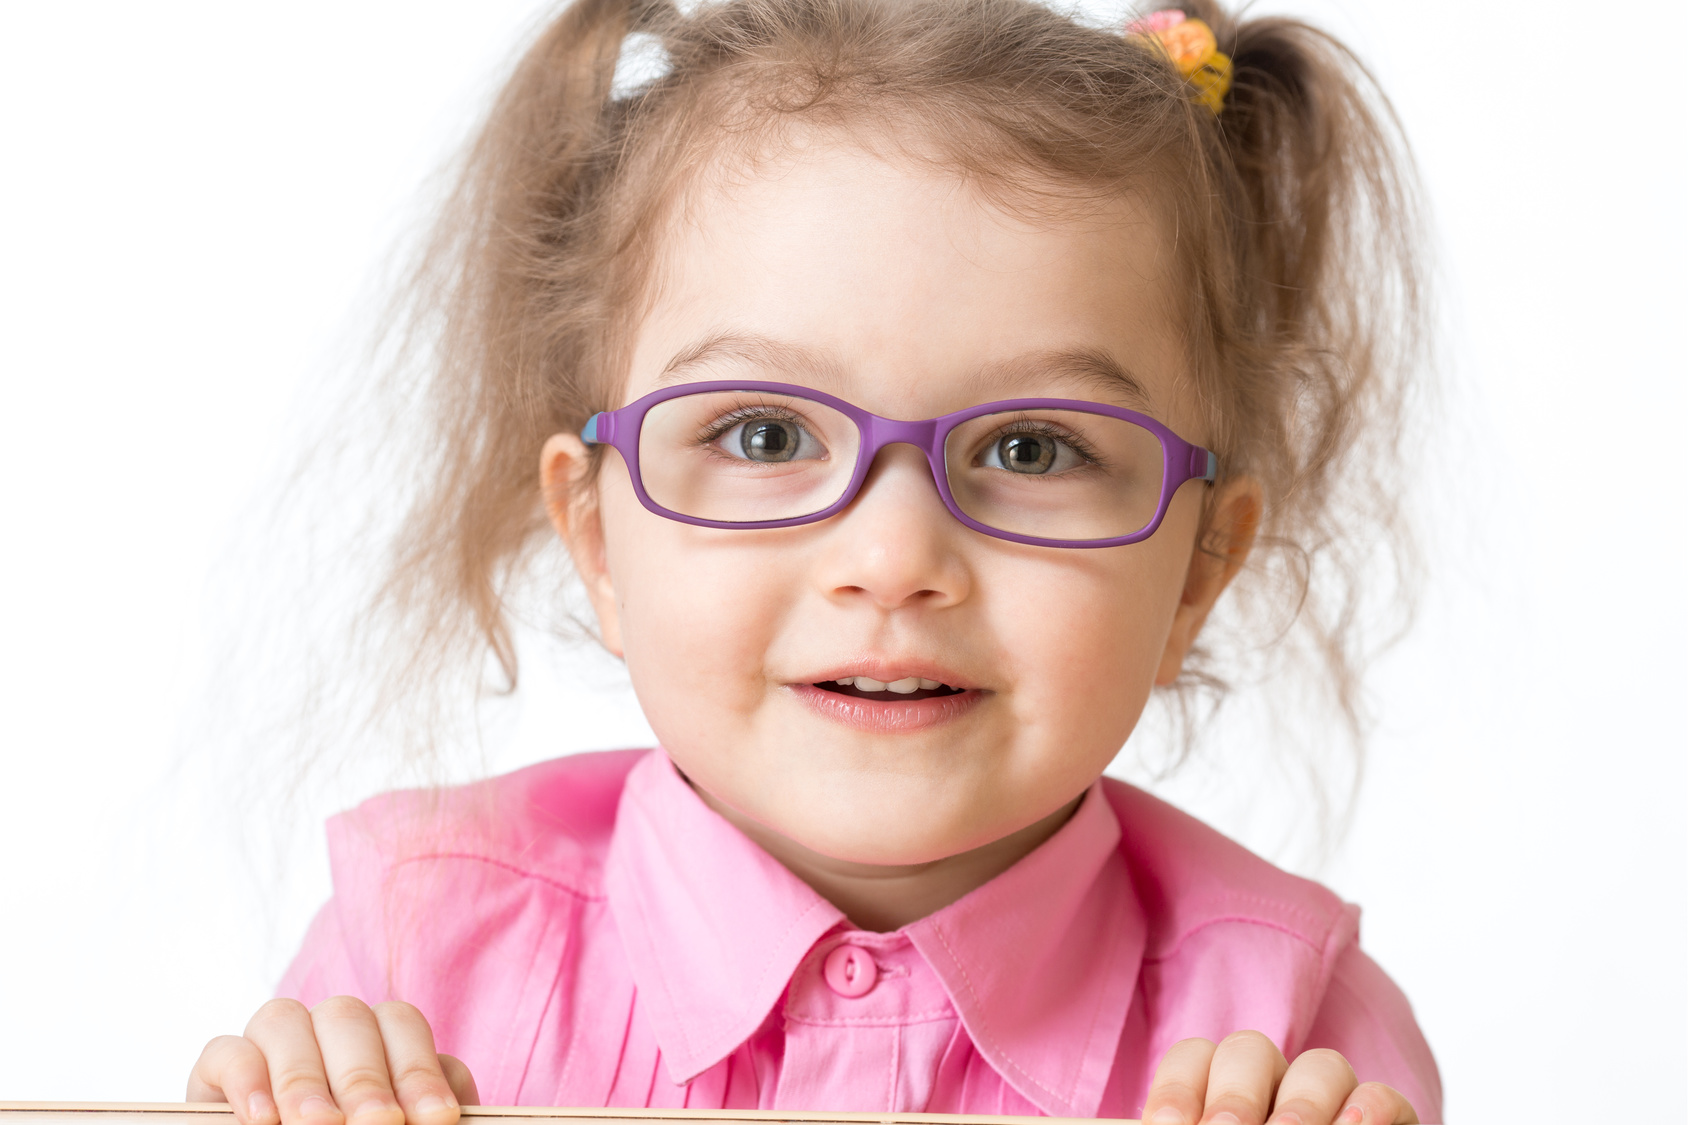 Smiling girl wearing glasses closeup portrait isolated